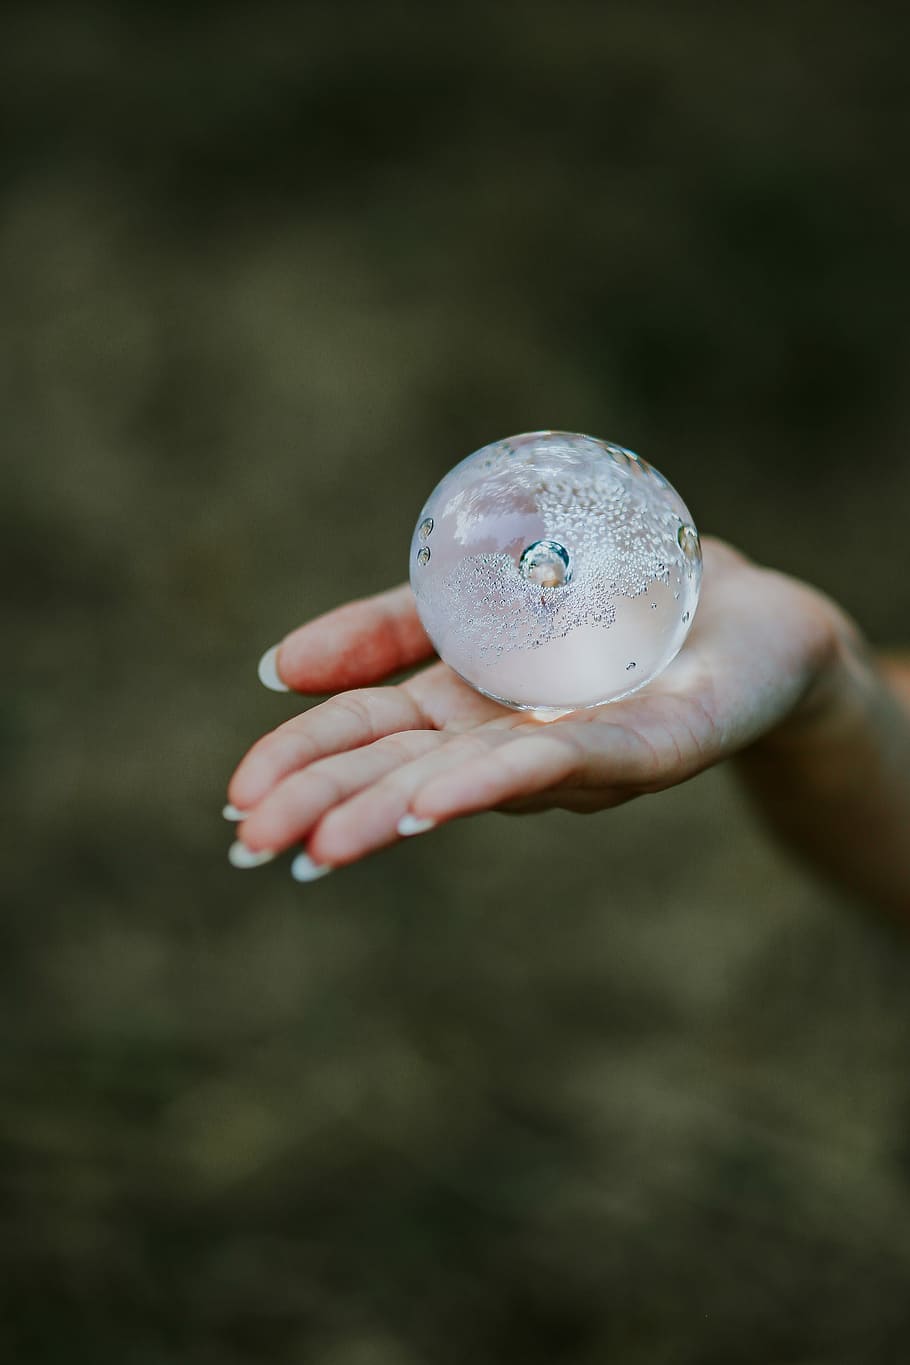 little, crystal ball, Woman, little crystal, female, hands, glass building, femine, nature, human Hand